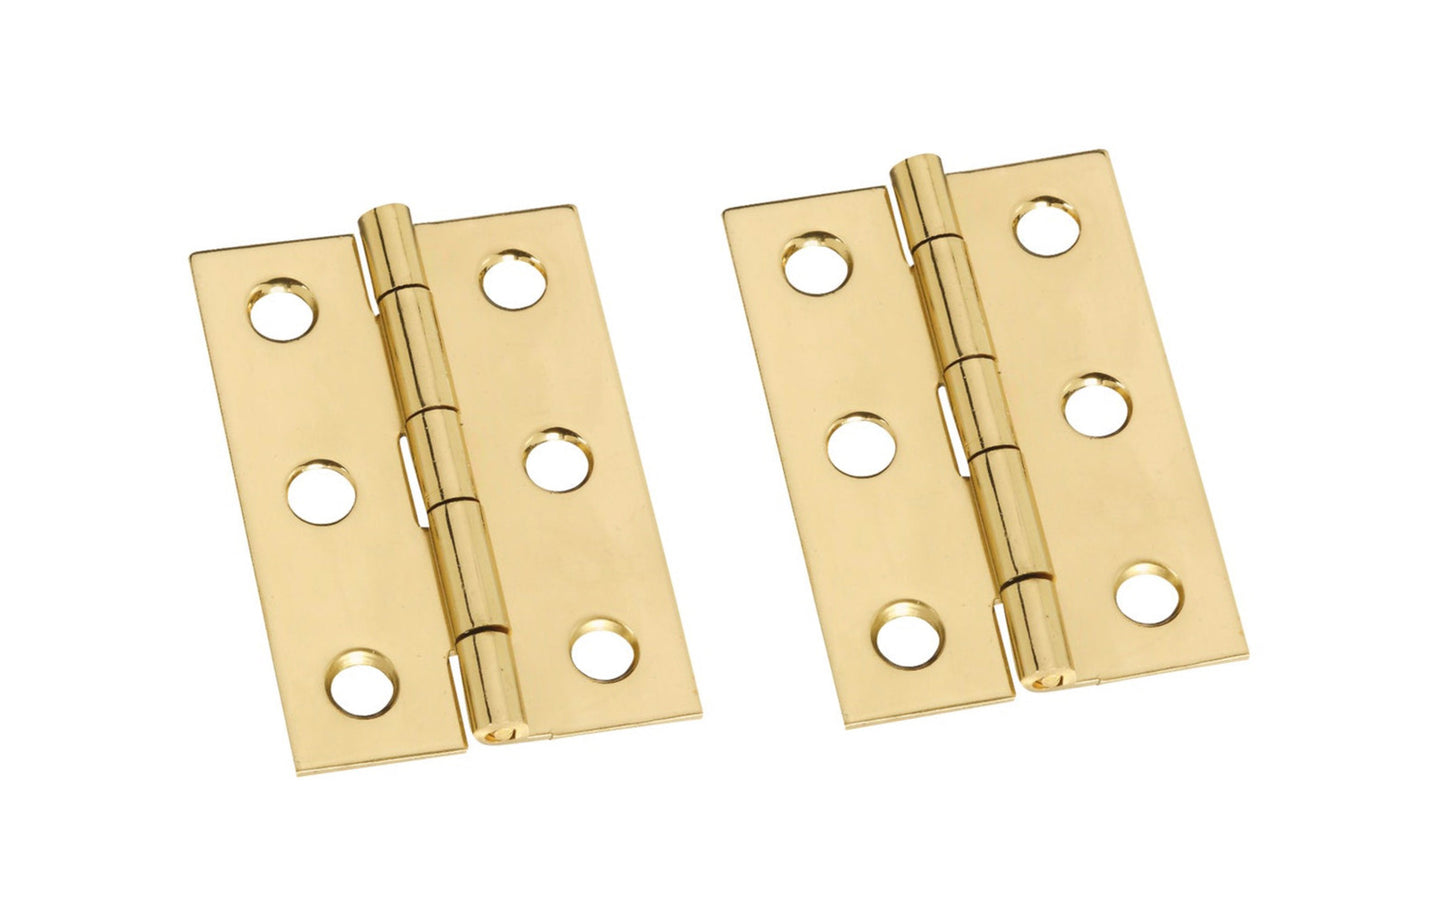 These solid brass hinges add a decorative appearance to small boxes, jewelry boxes, small lightweight cabinet doors, craft projects, etc. Made of solid brass material with a bright brass finish. 2" high x 1-3/8" wide. Surface mount. Non-removable pin. Pair of hinges. National Hardware Model No. N211-375. 038613211377